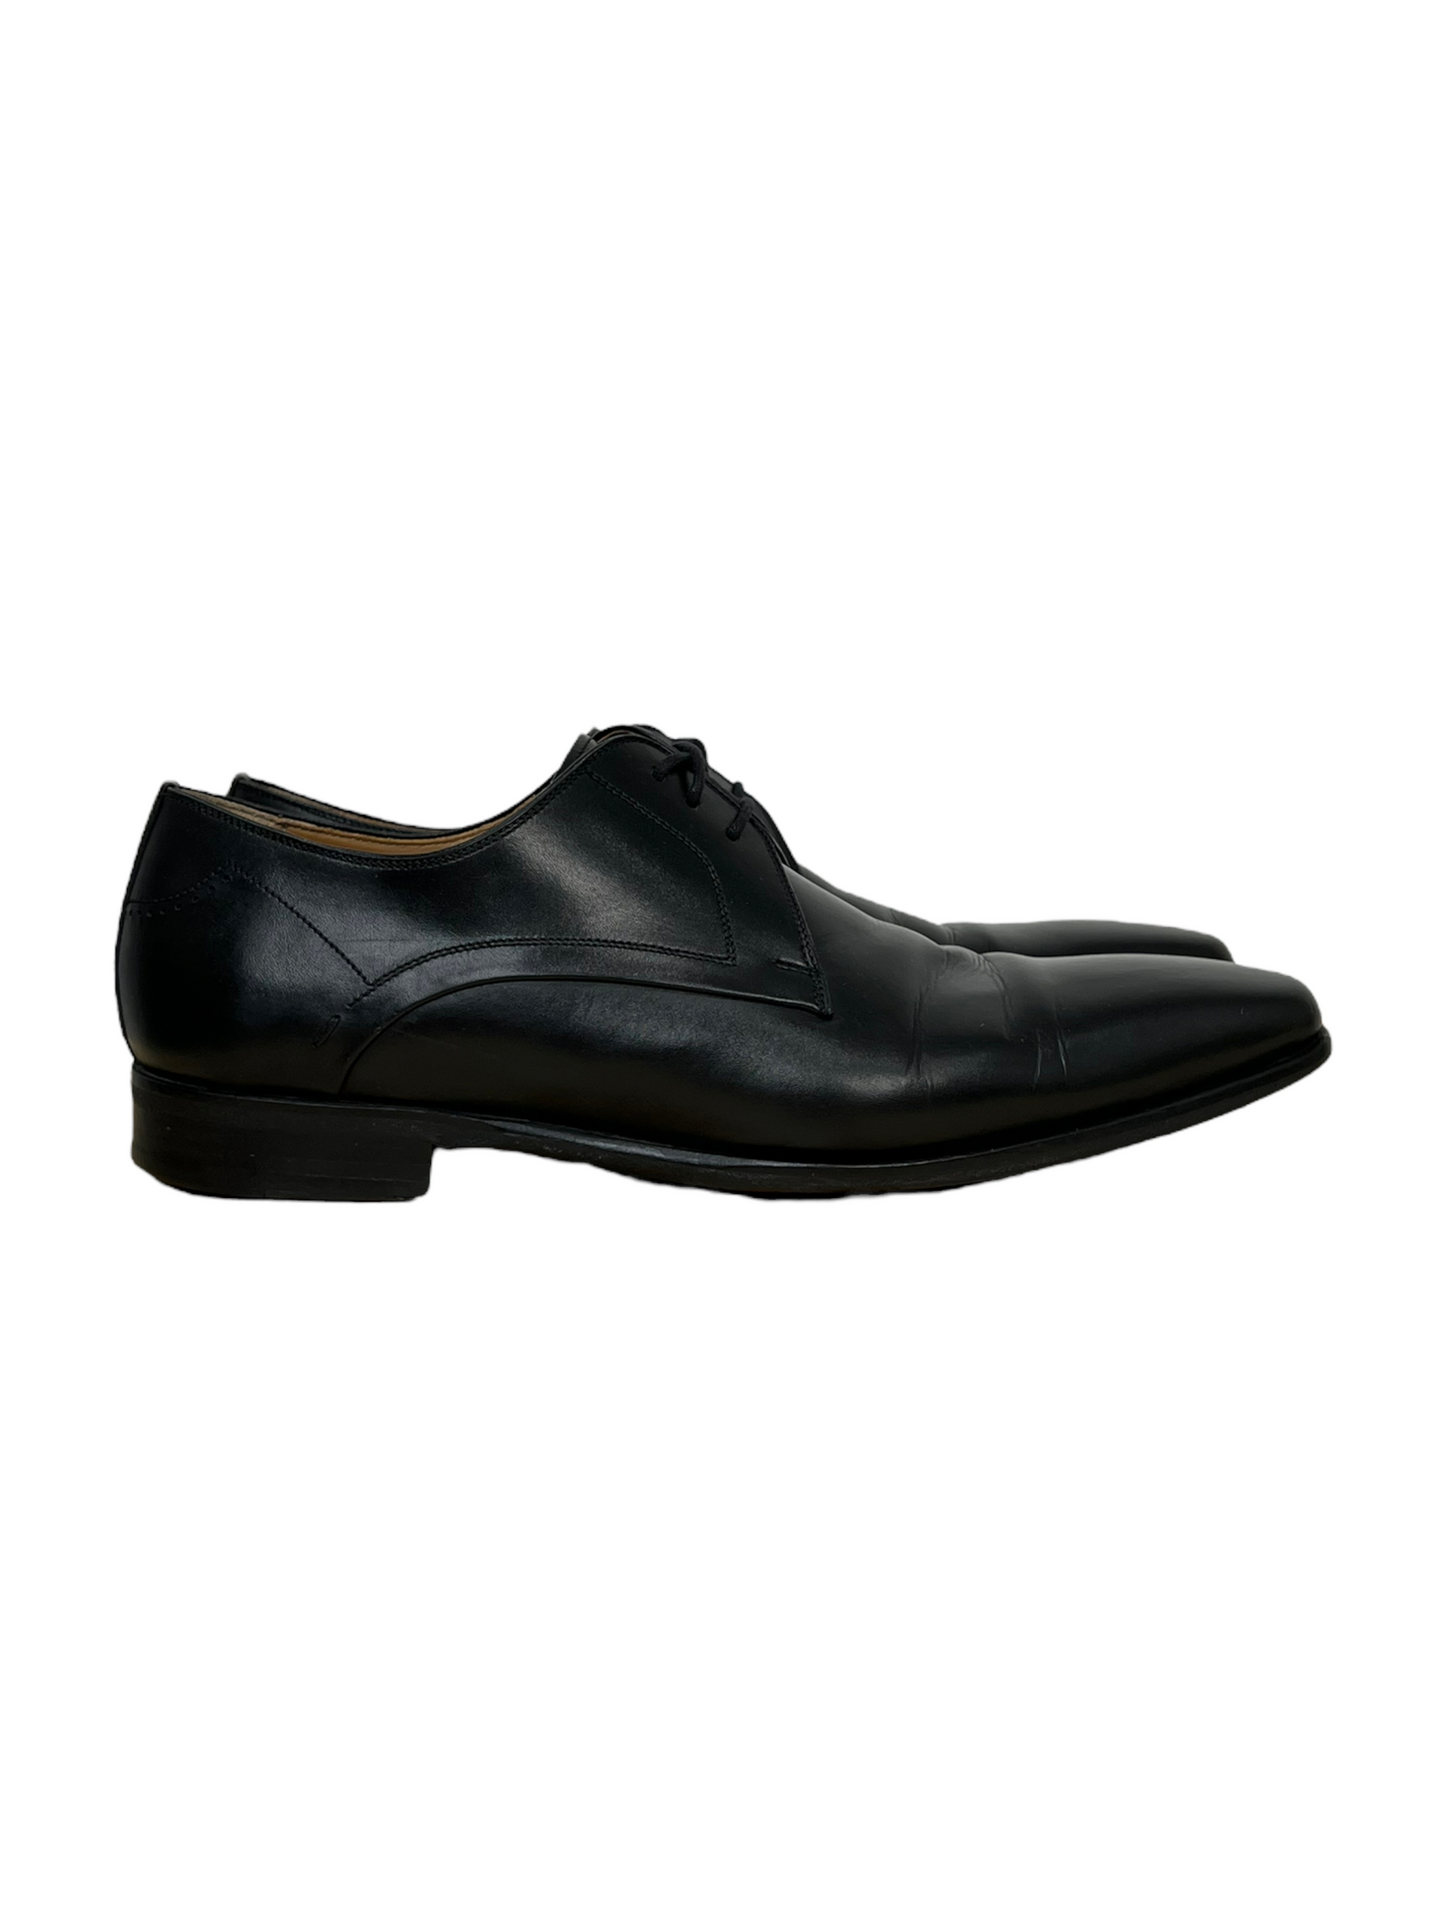 Magnanni Black Leather Derby Dress Shoes - Genuine Design Luxury Consignment for Men. New & Pre-Owned Clothing, Shoes, & Accessories. Calgary, Canada